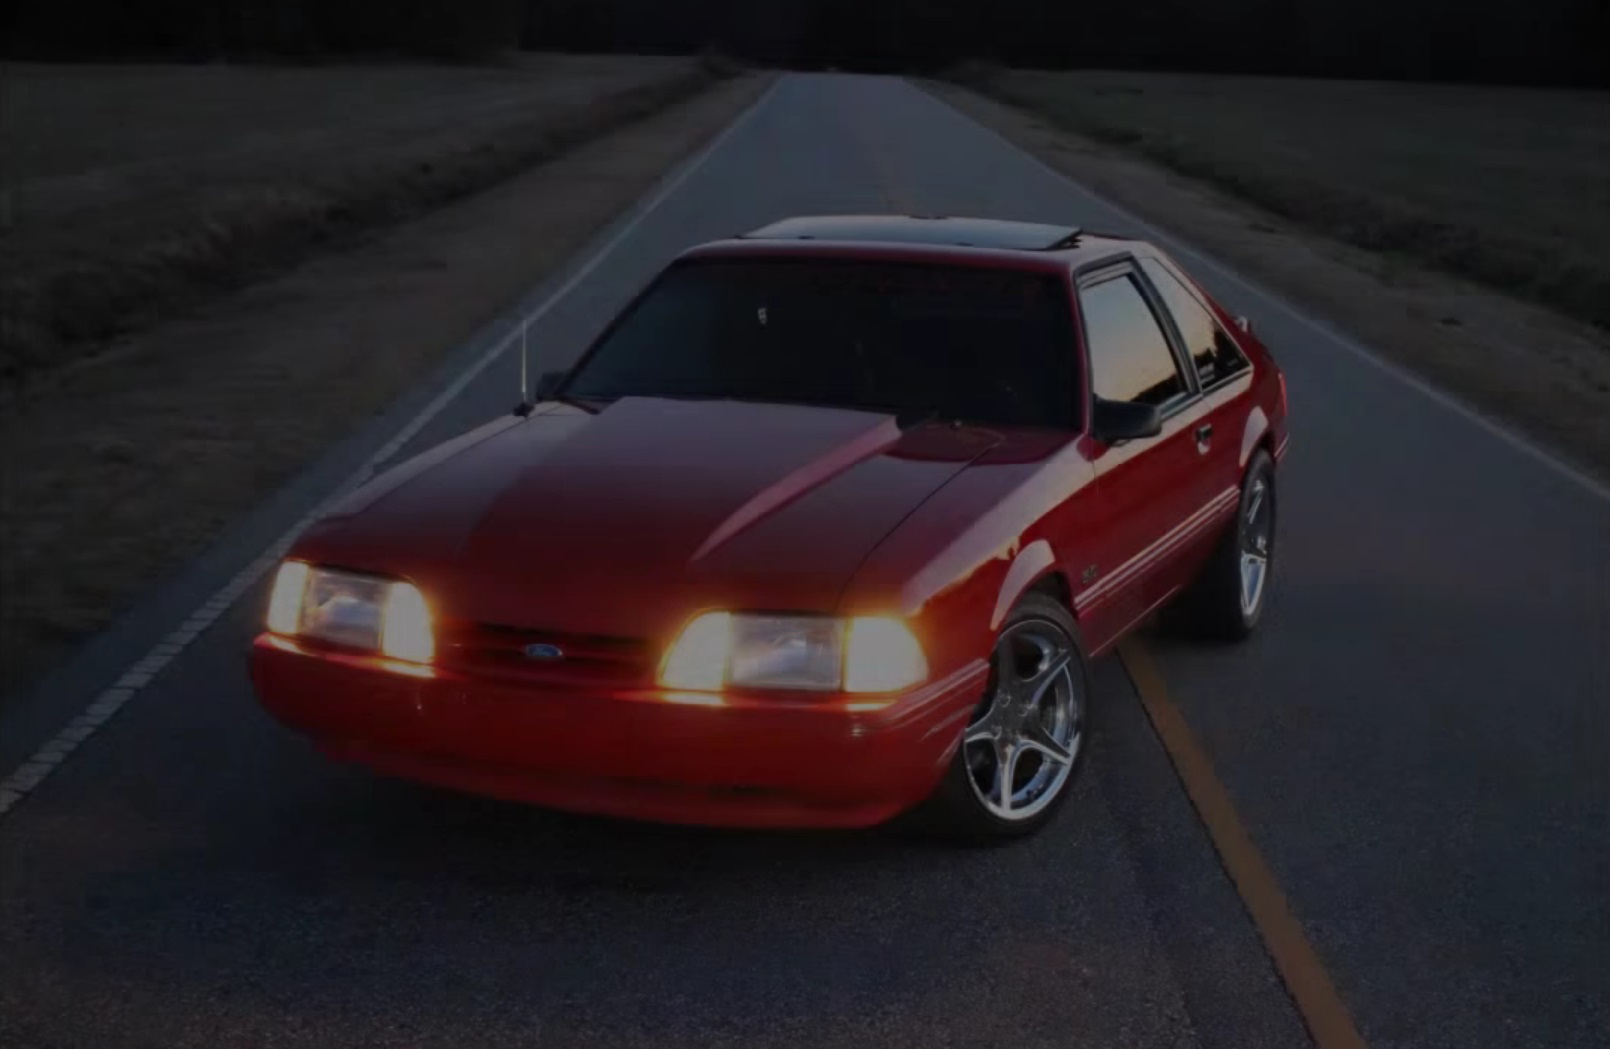 Video: Supercharged 1992 Ford Mustang 5.0 LX